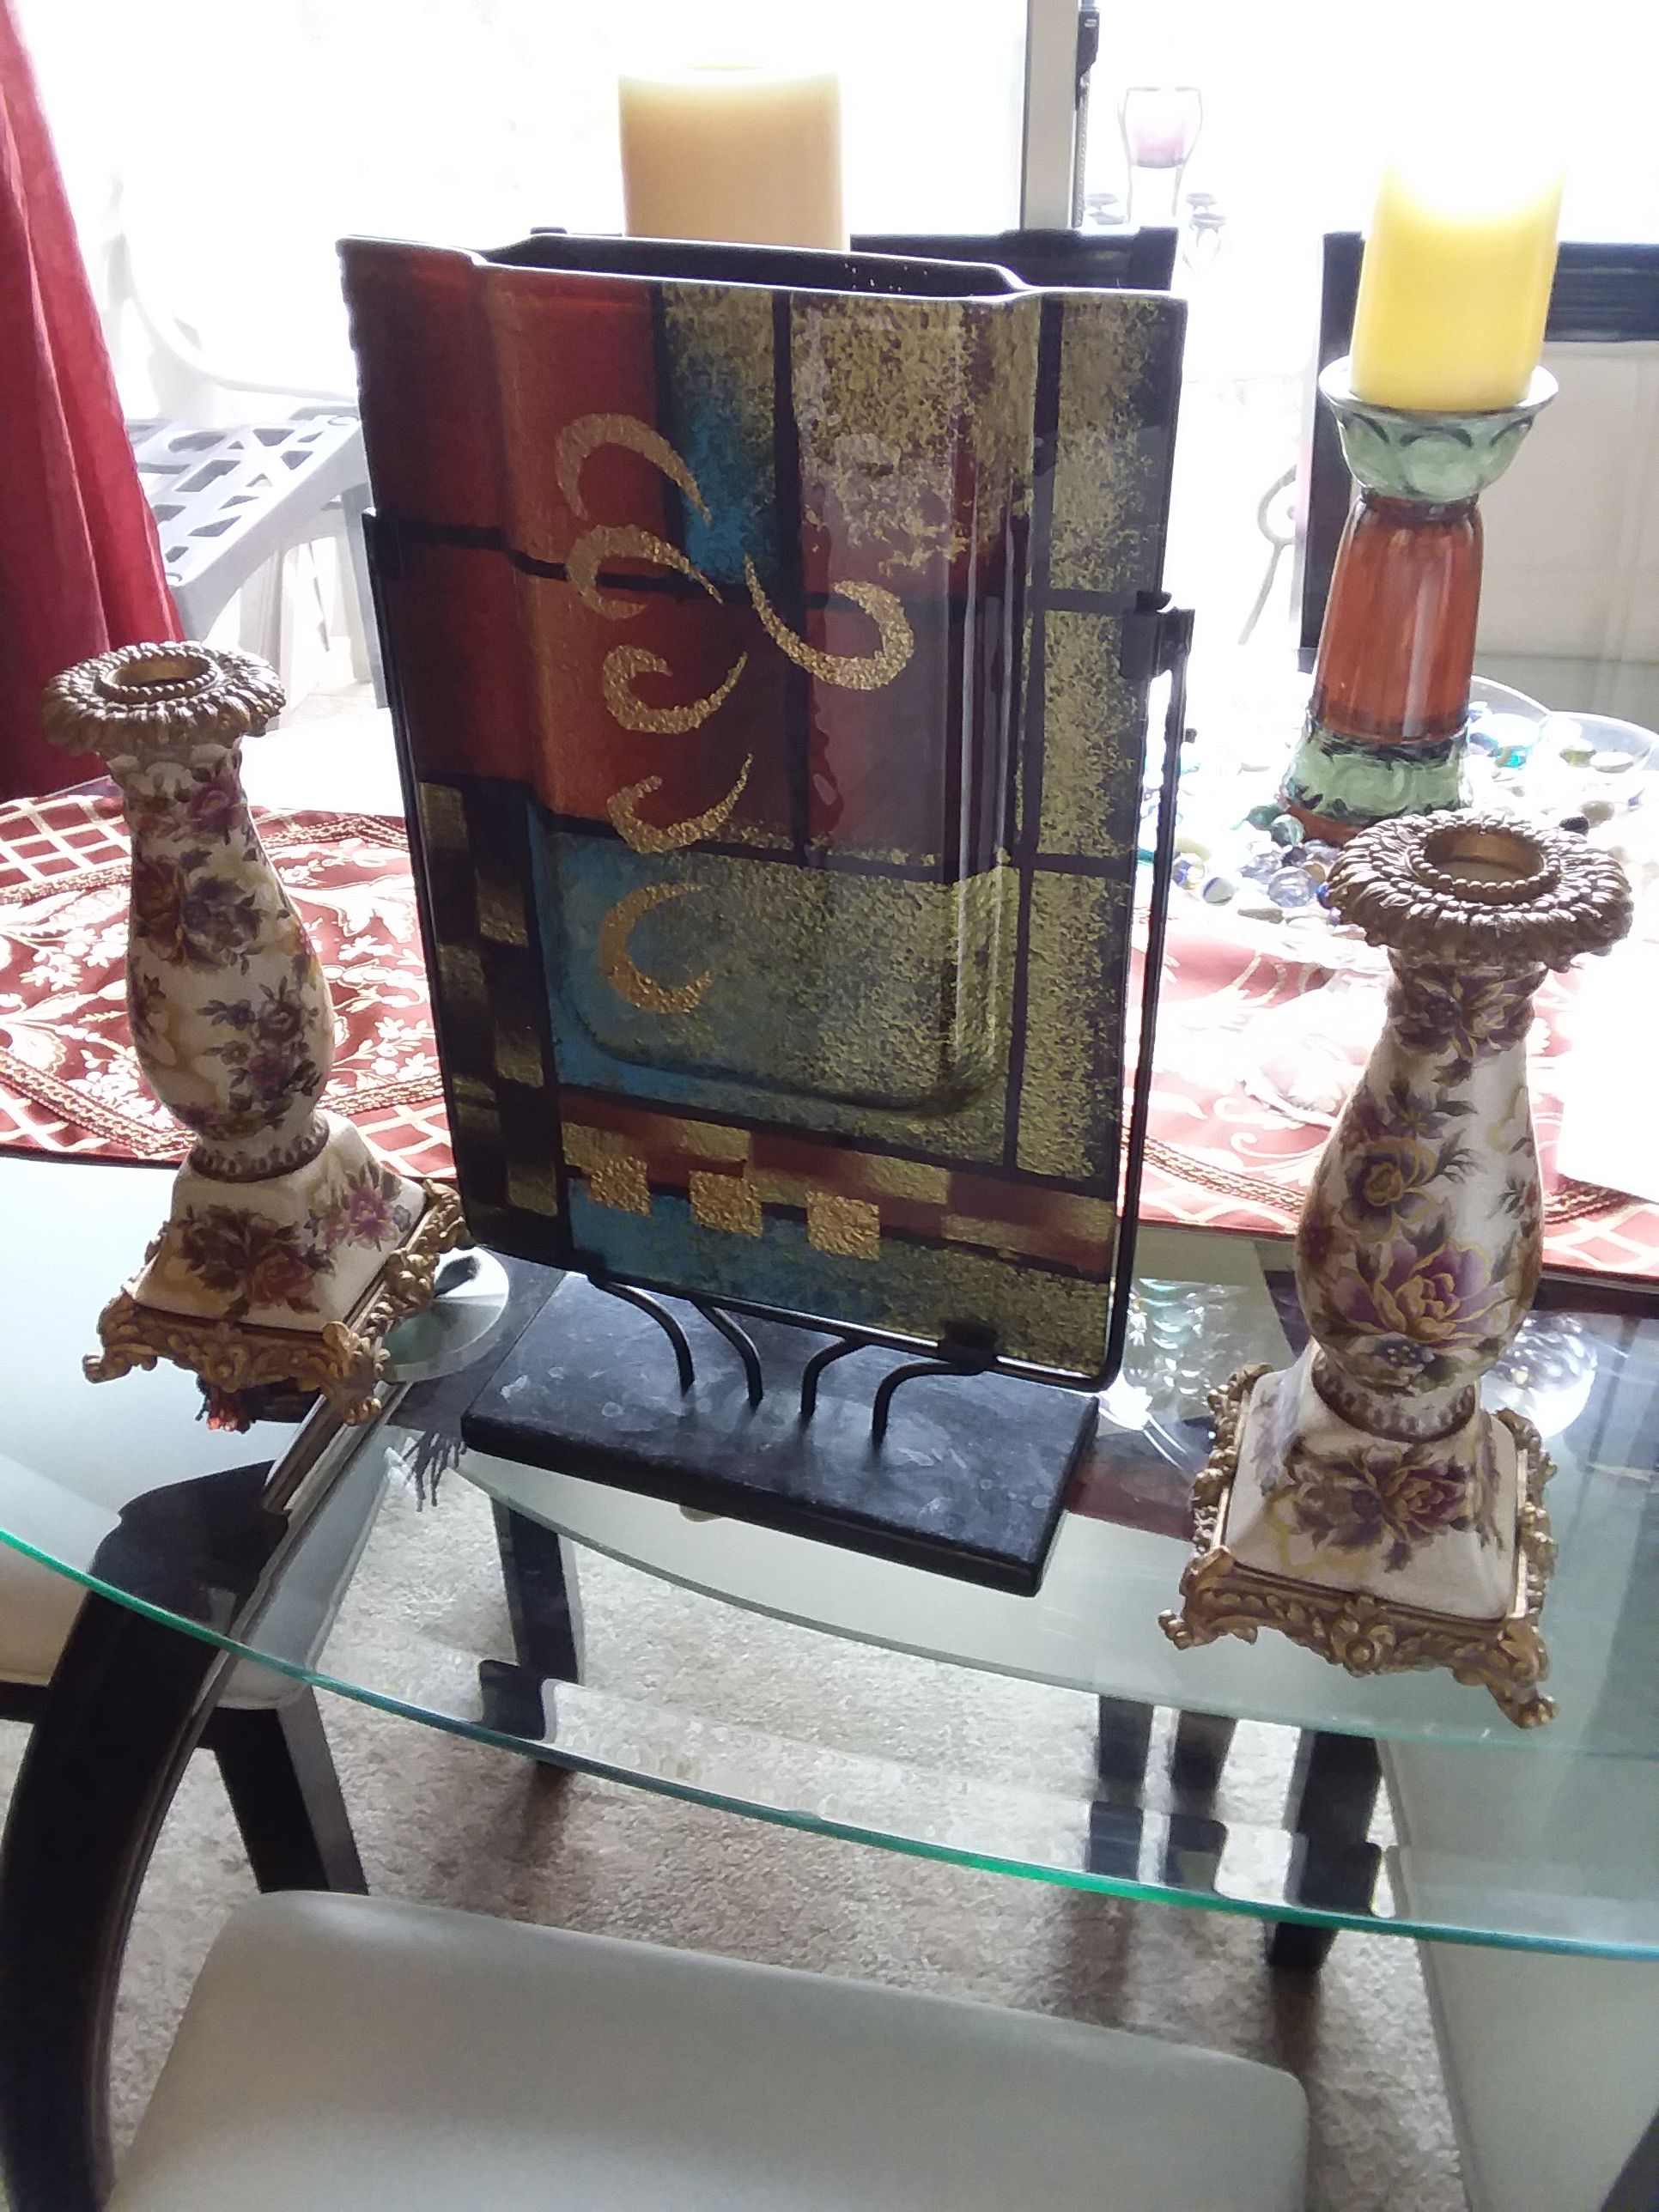 2 BEAUTIFUL CANDLE HOLDERS AND LIVING ROOM DECORATION VASE FOR ONLY $39.00